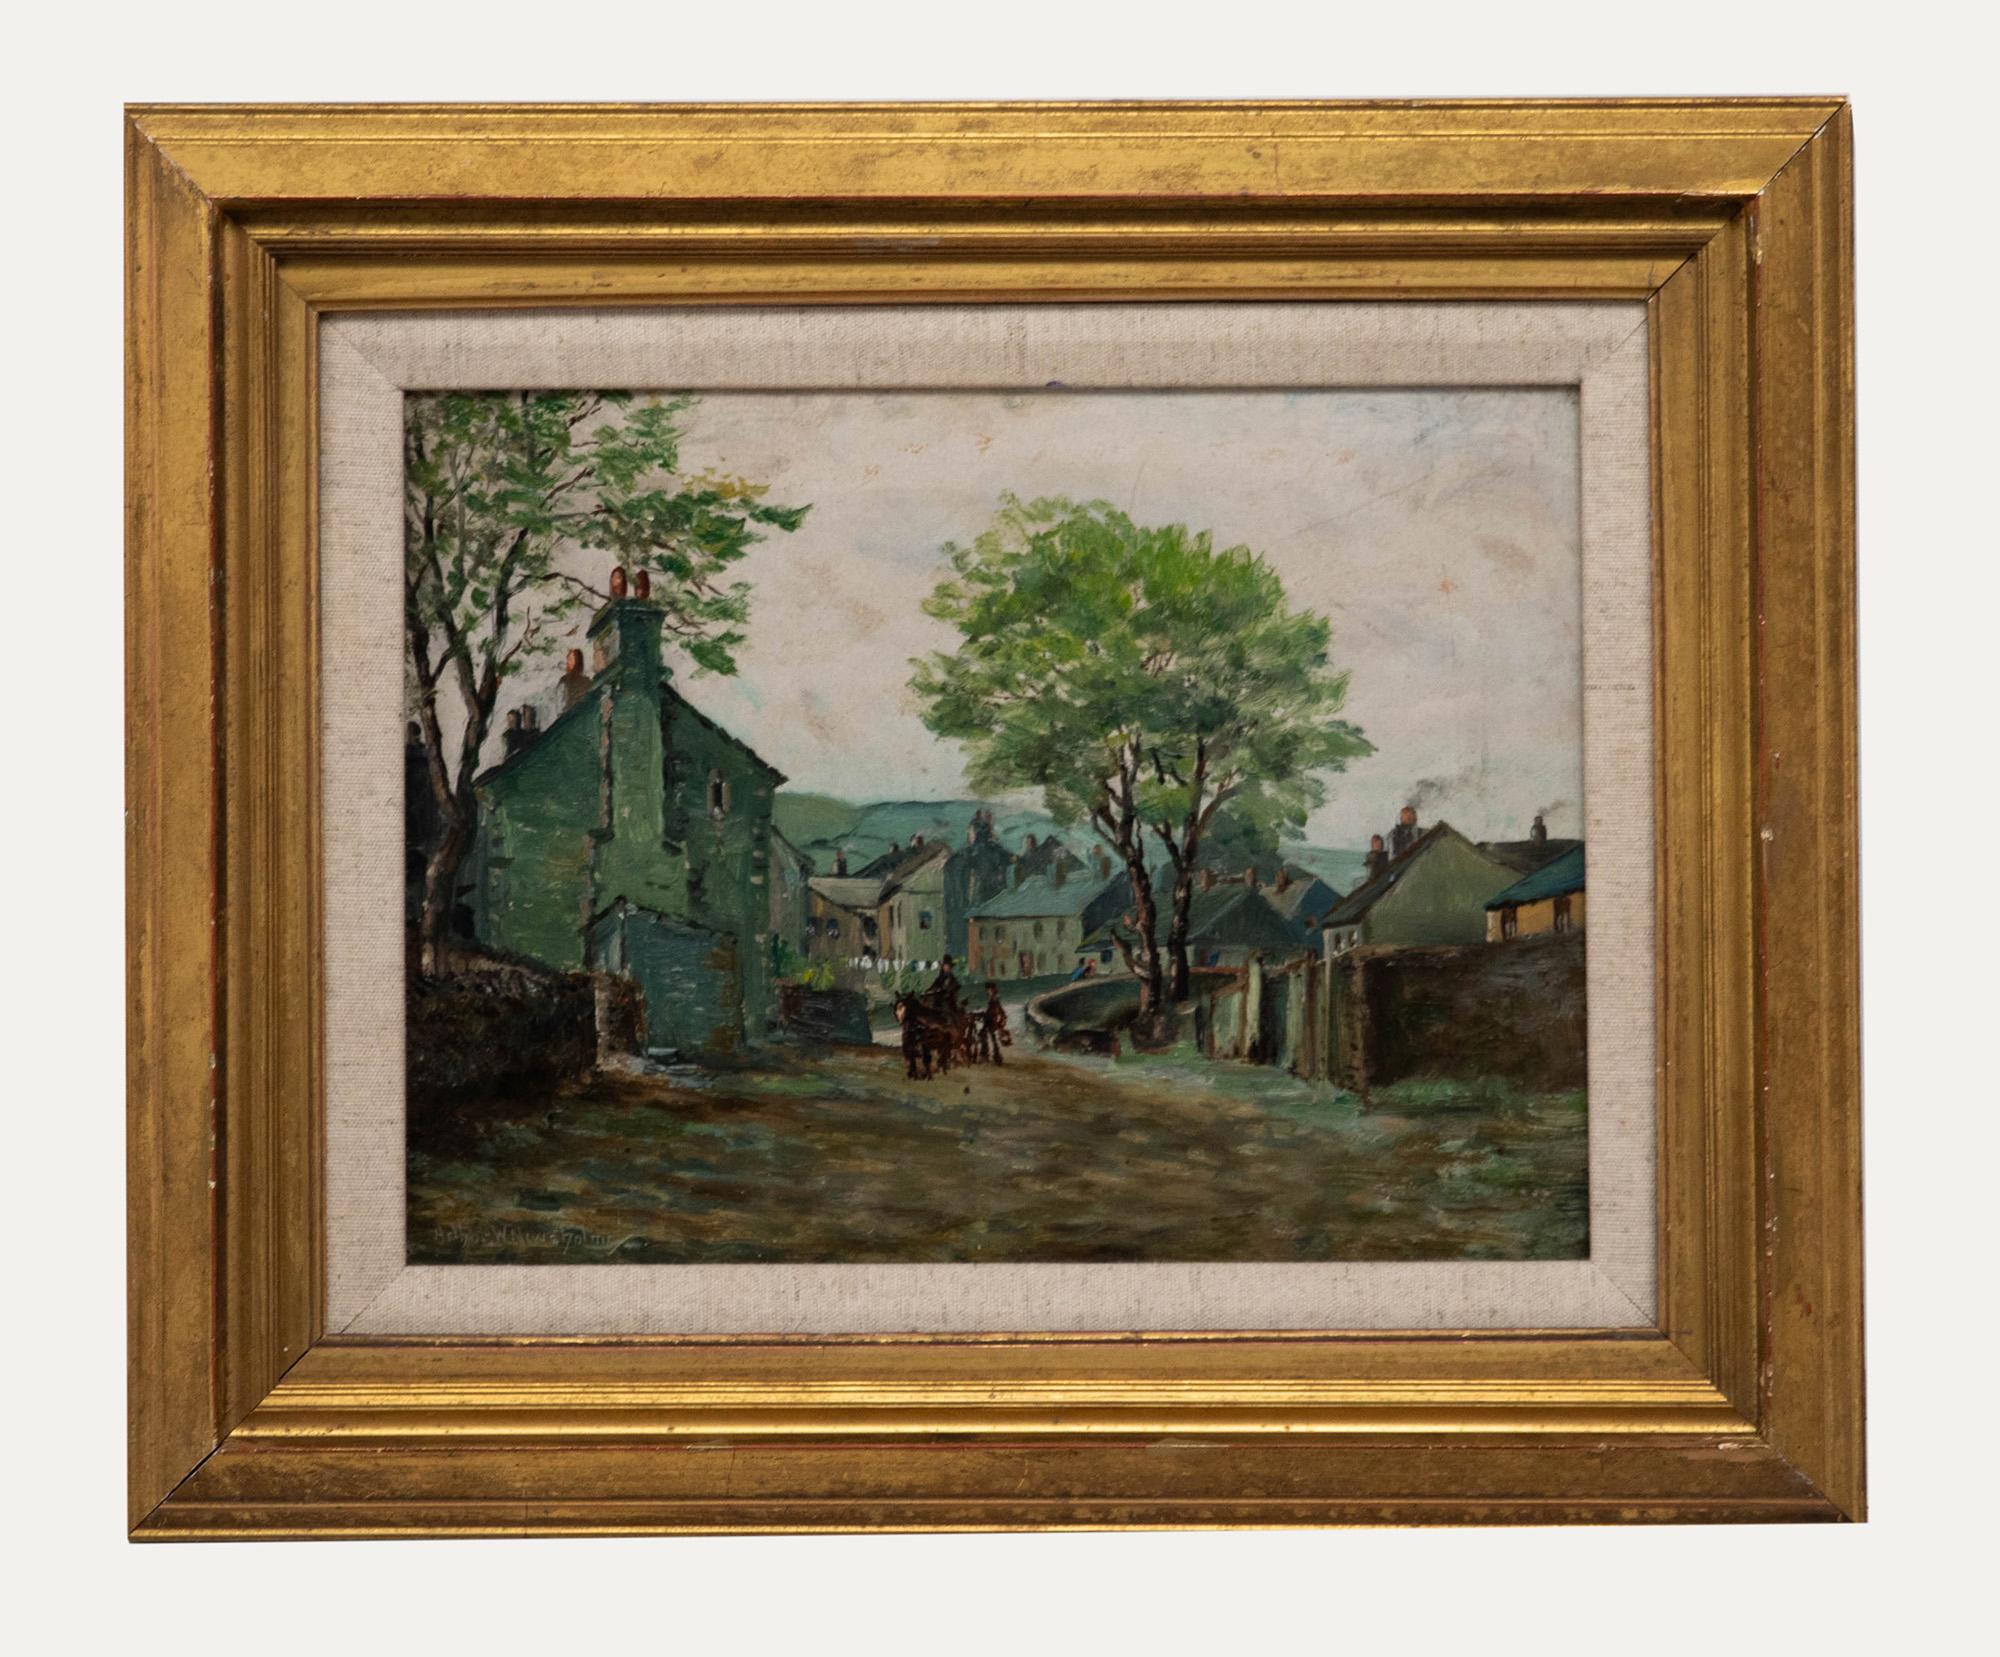 Unknown Landscape Painting - Arthur W. Newsholme - Early 20th Century Oil, Morning in the Village